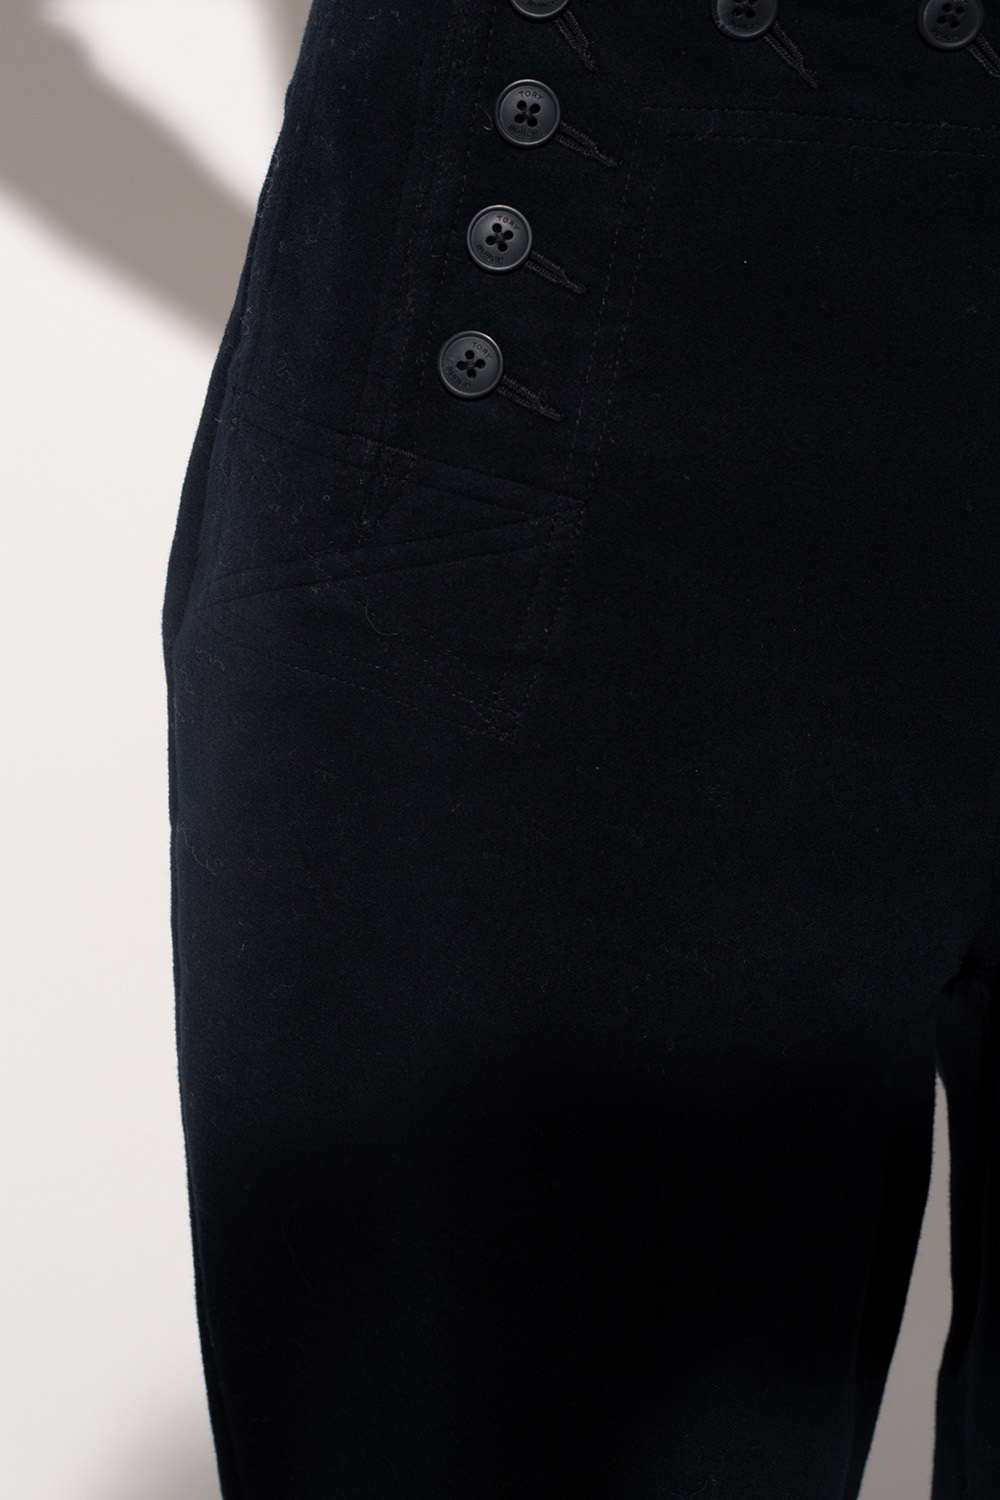 Tory Burch Trousers with buttons